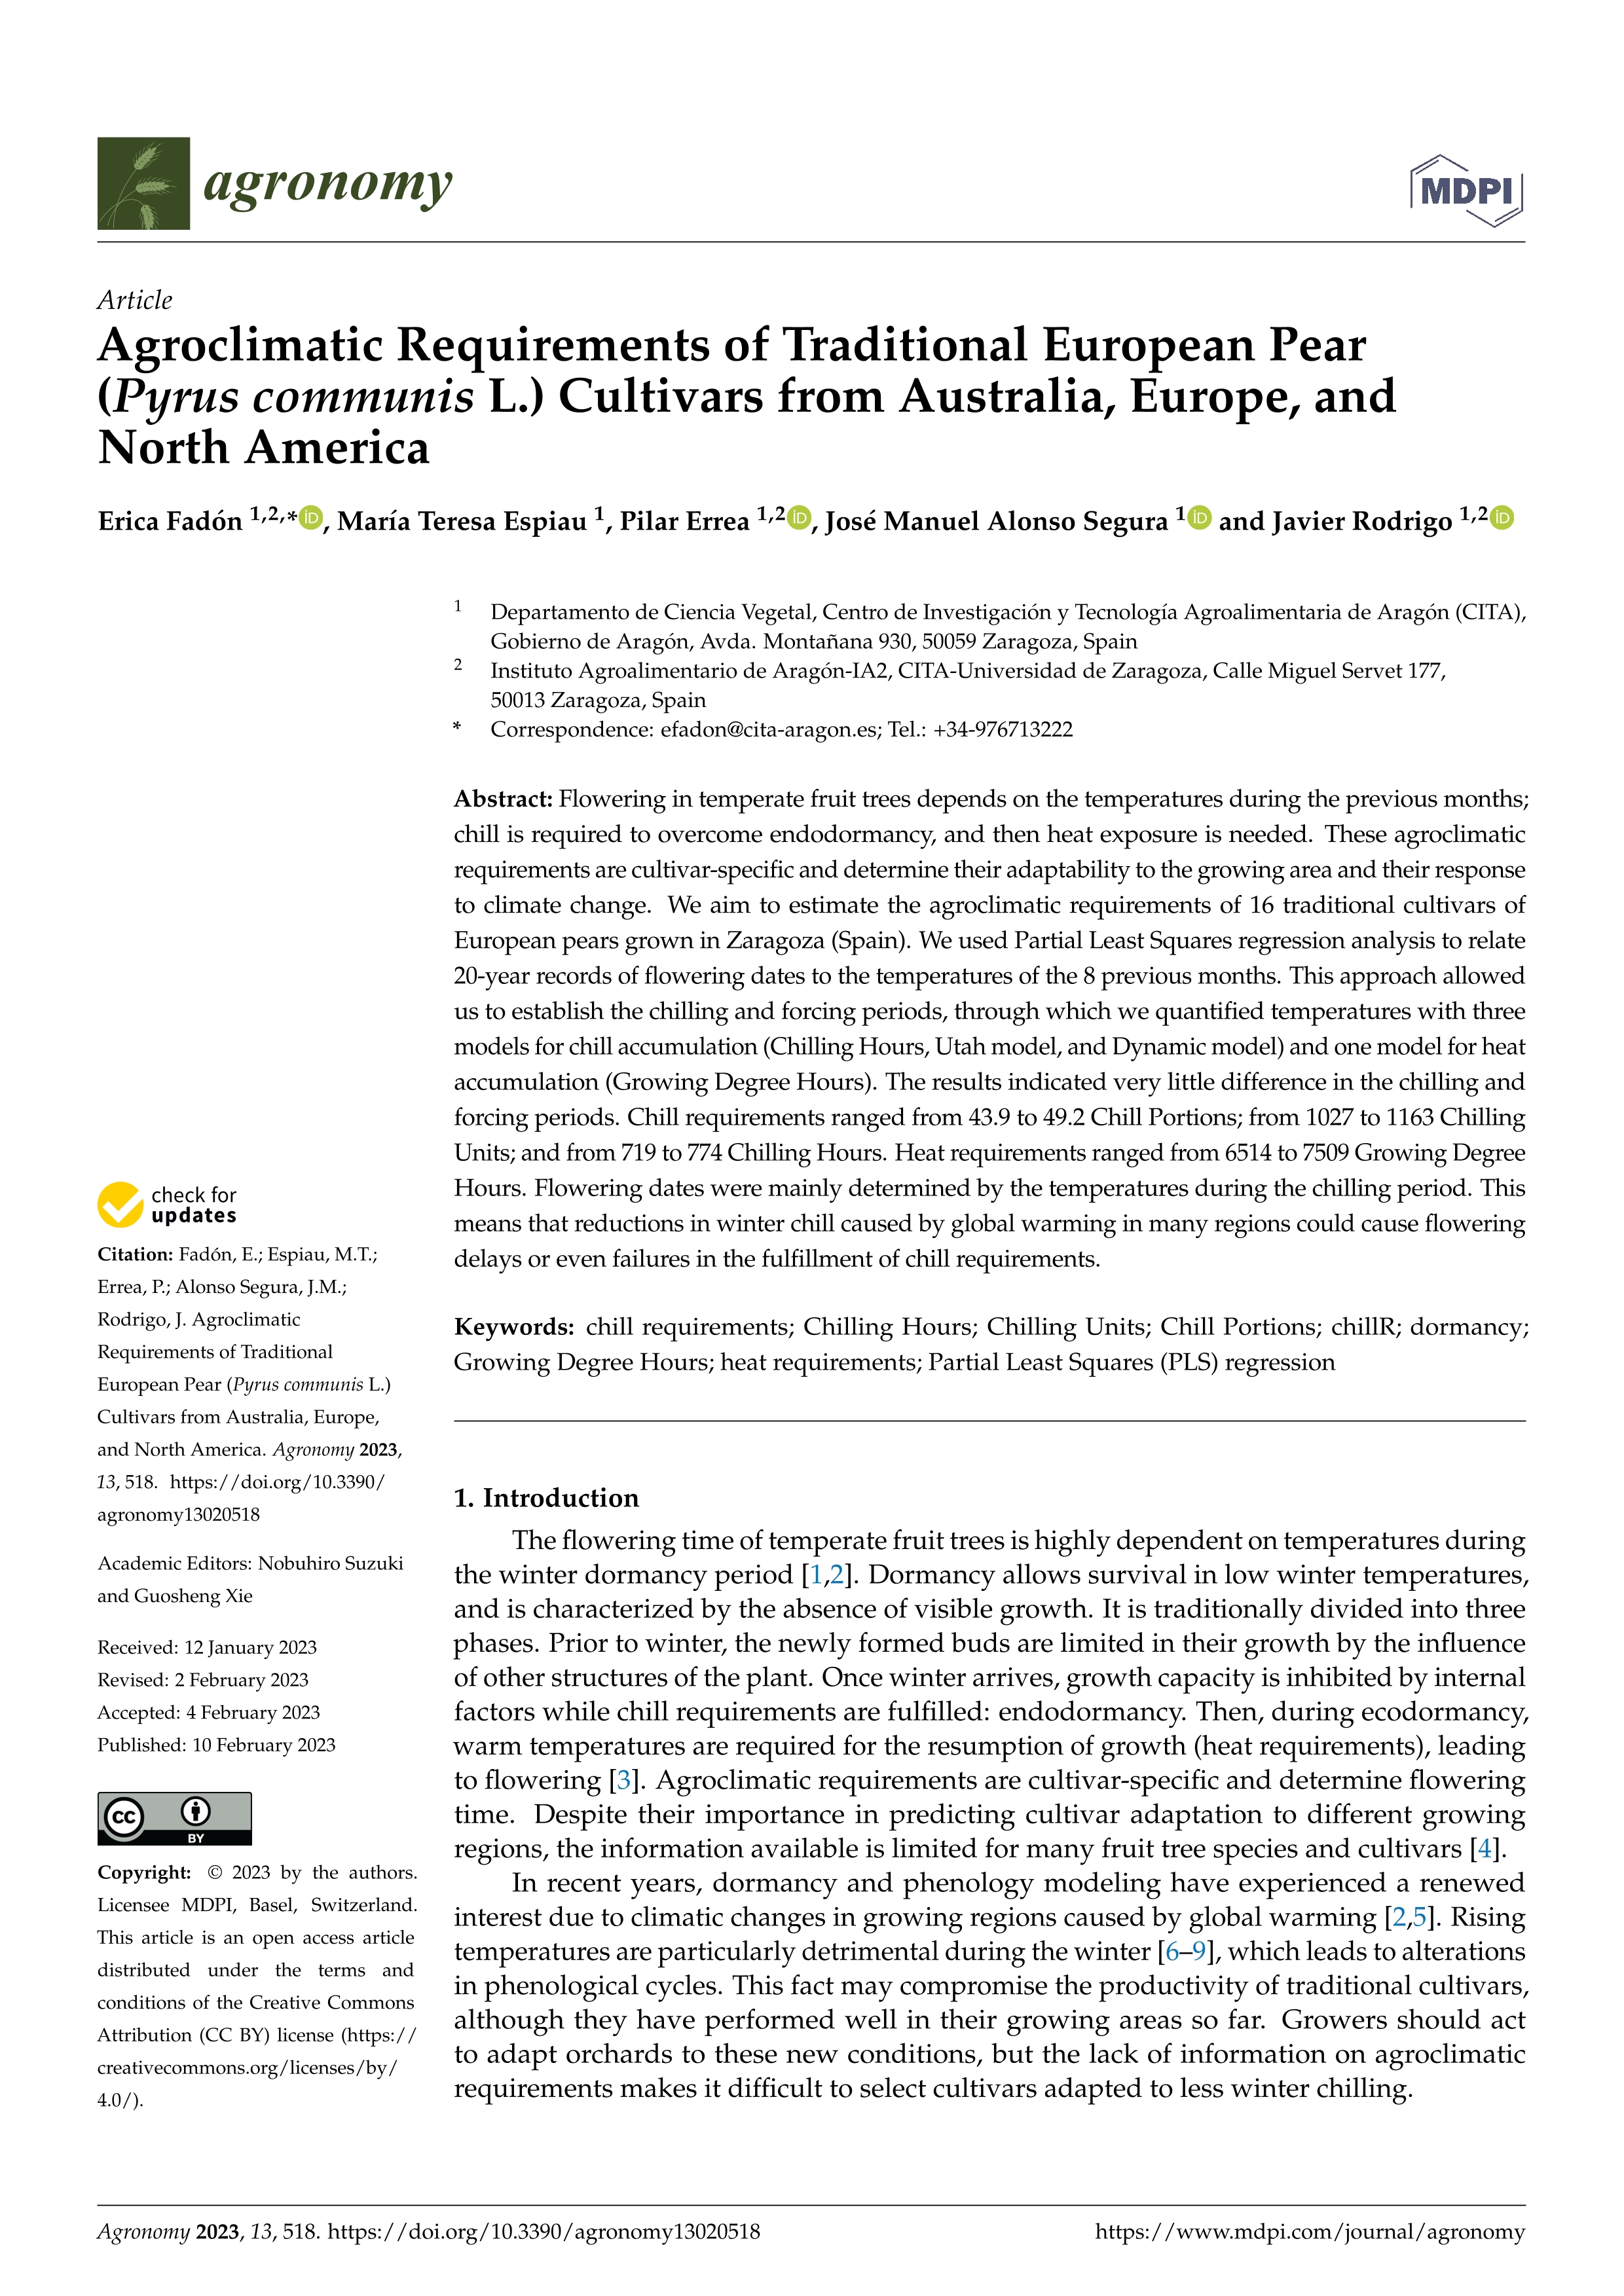 Agroclimatic requirements of traditional european pear (Pyrus communis l.) cultivars from Australia, Europe, and North America